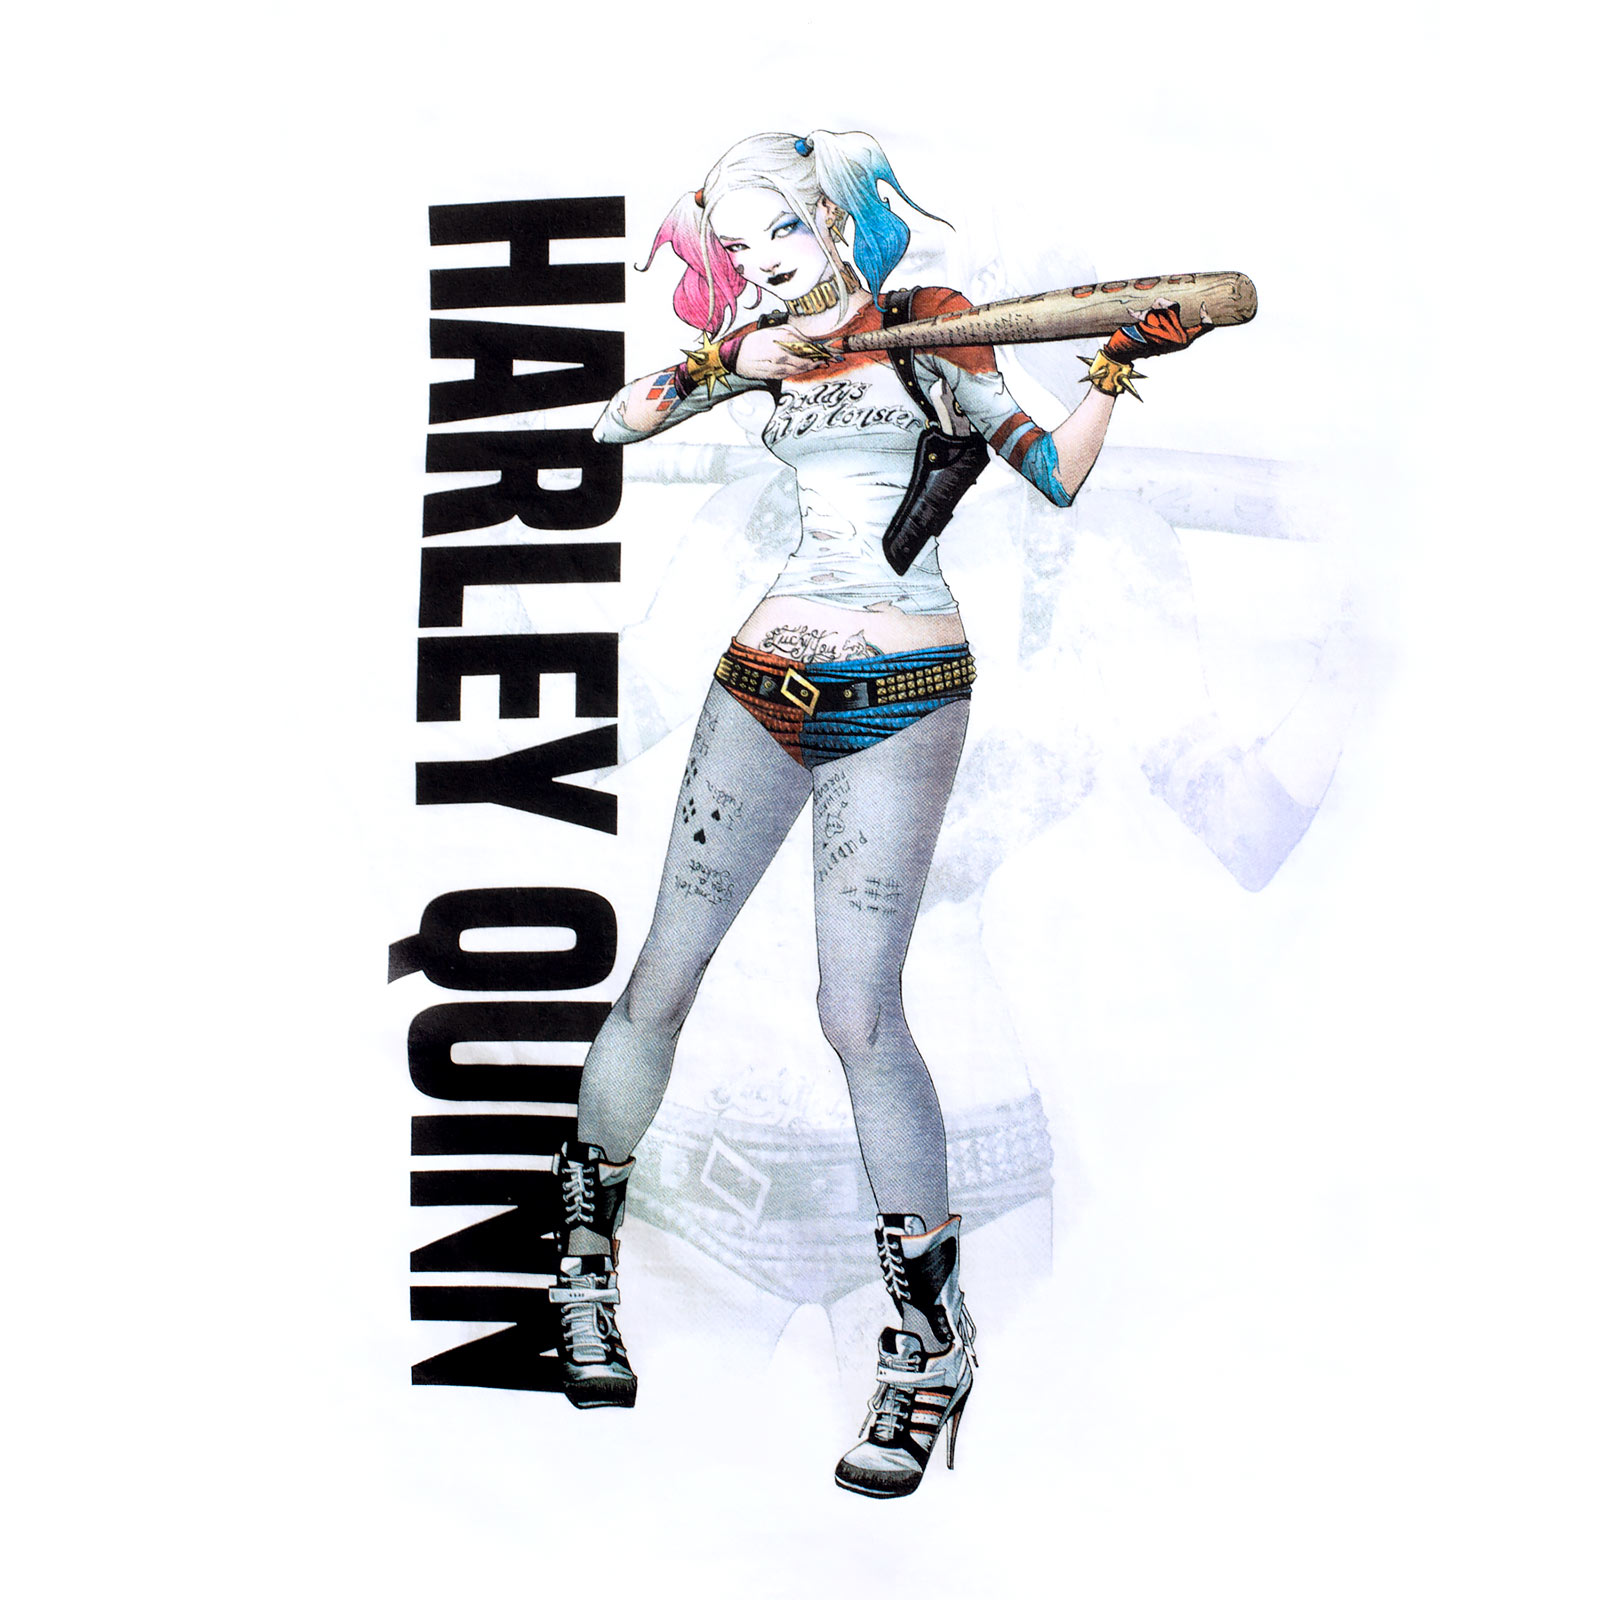 Suicide Squad - Harley Quinn Poster T-Shirt white